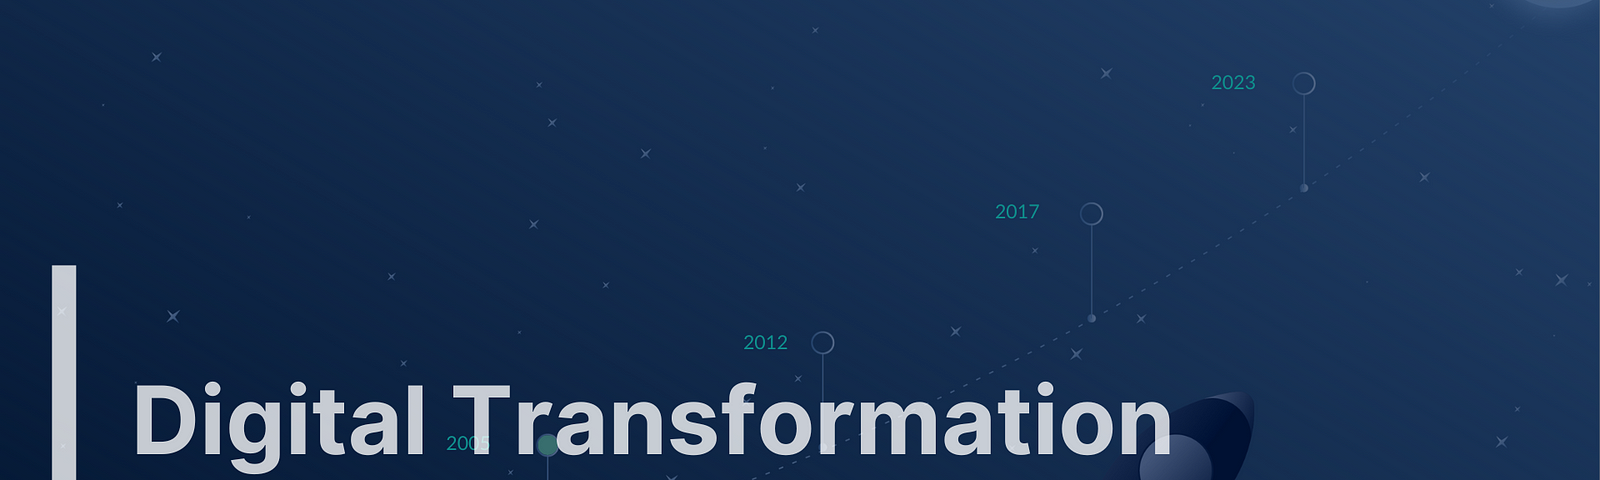 Embrace digital transformation for business success. Navigate the path to growth with strategic planning and cutting-edge technologies. Unleash your organization’s potential.